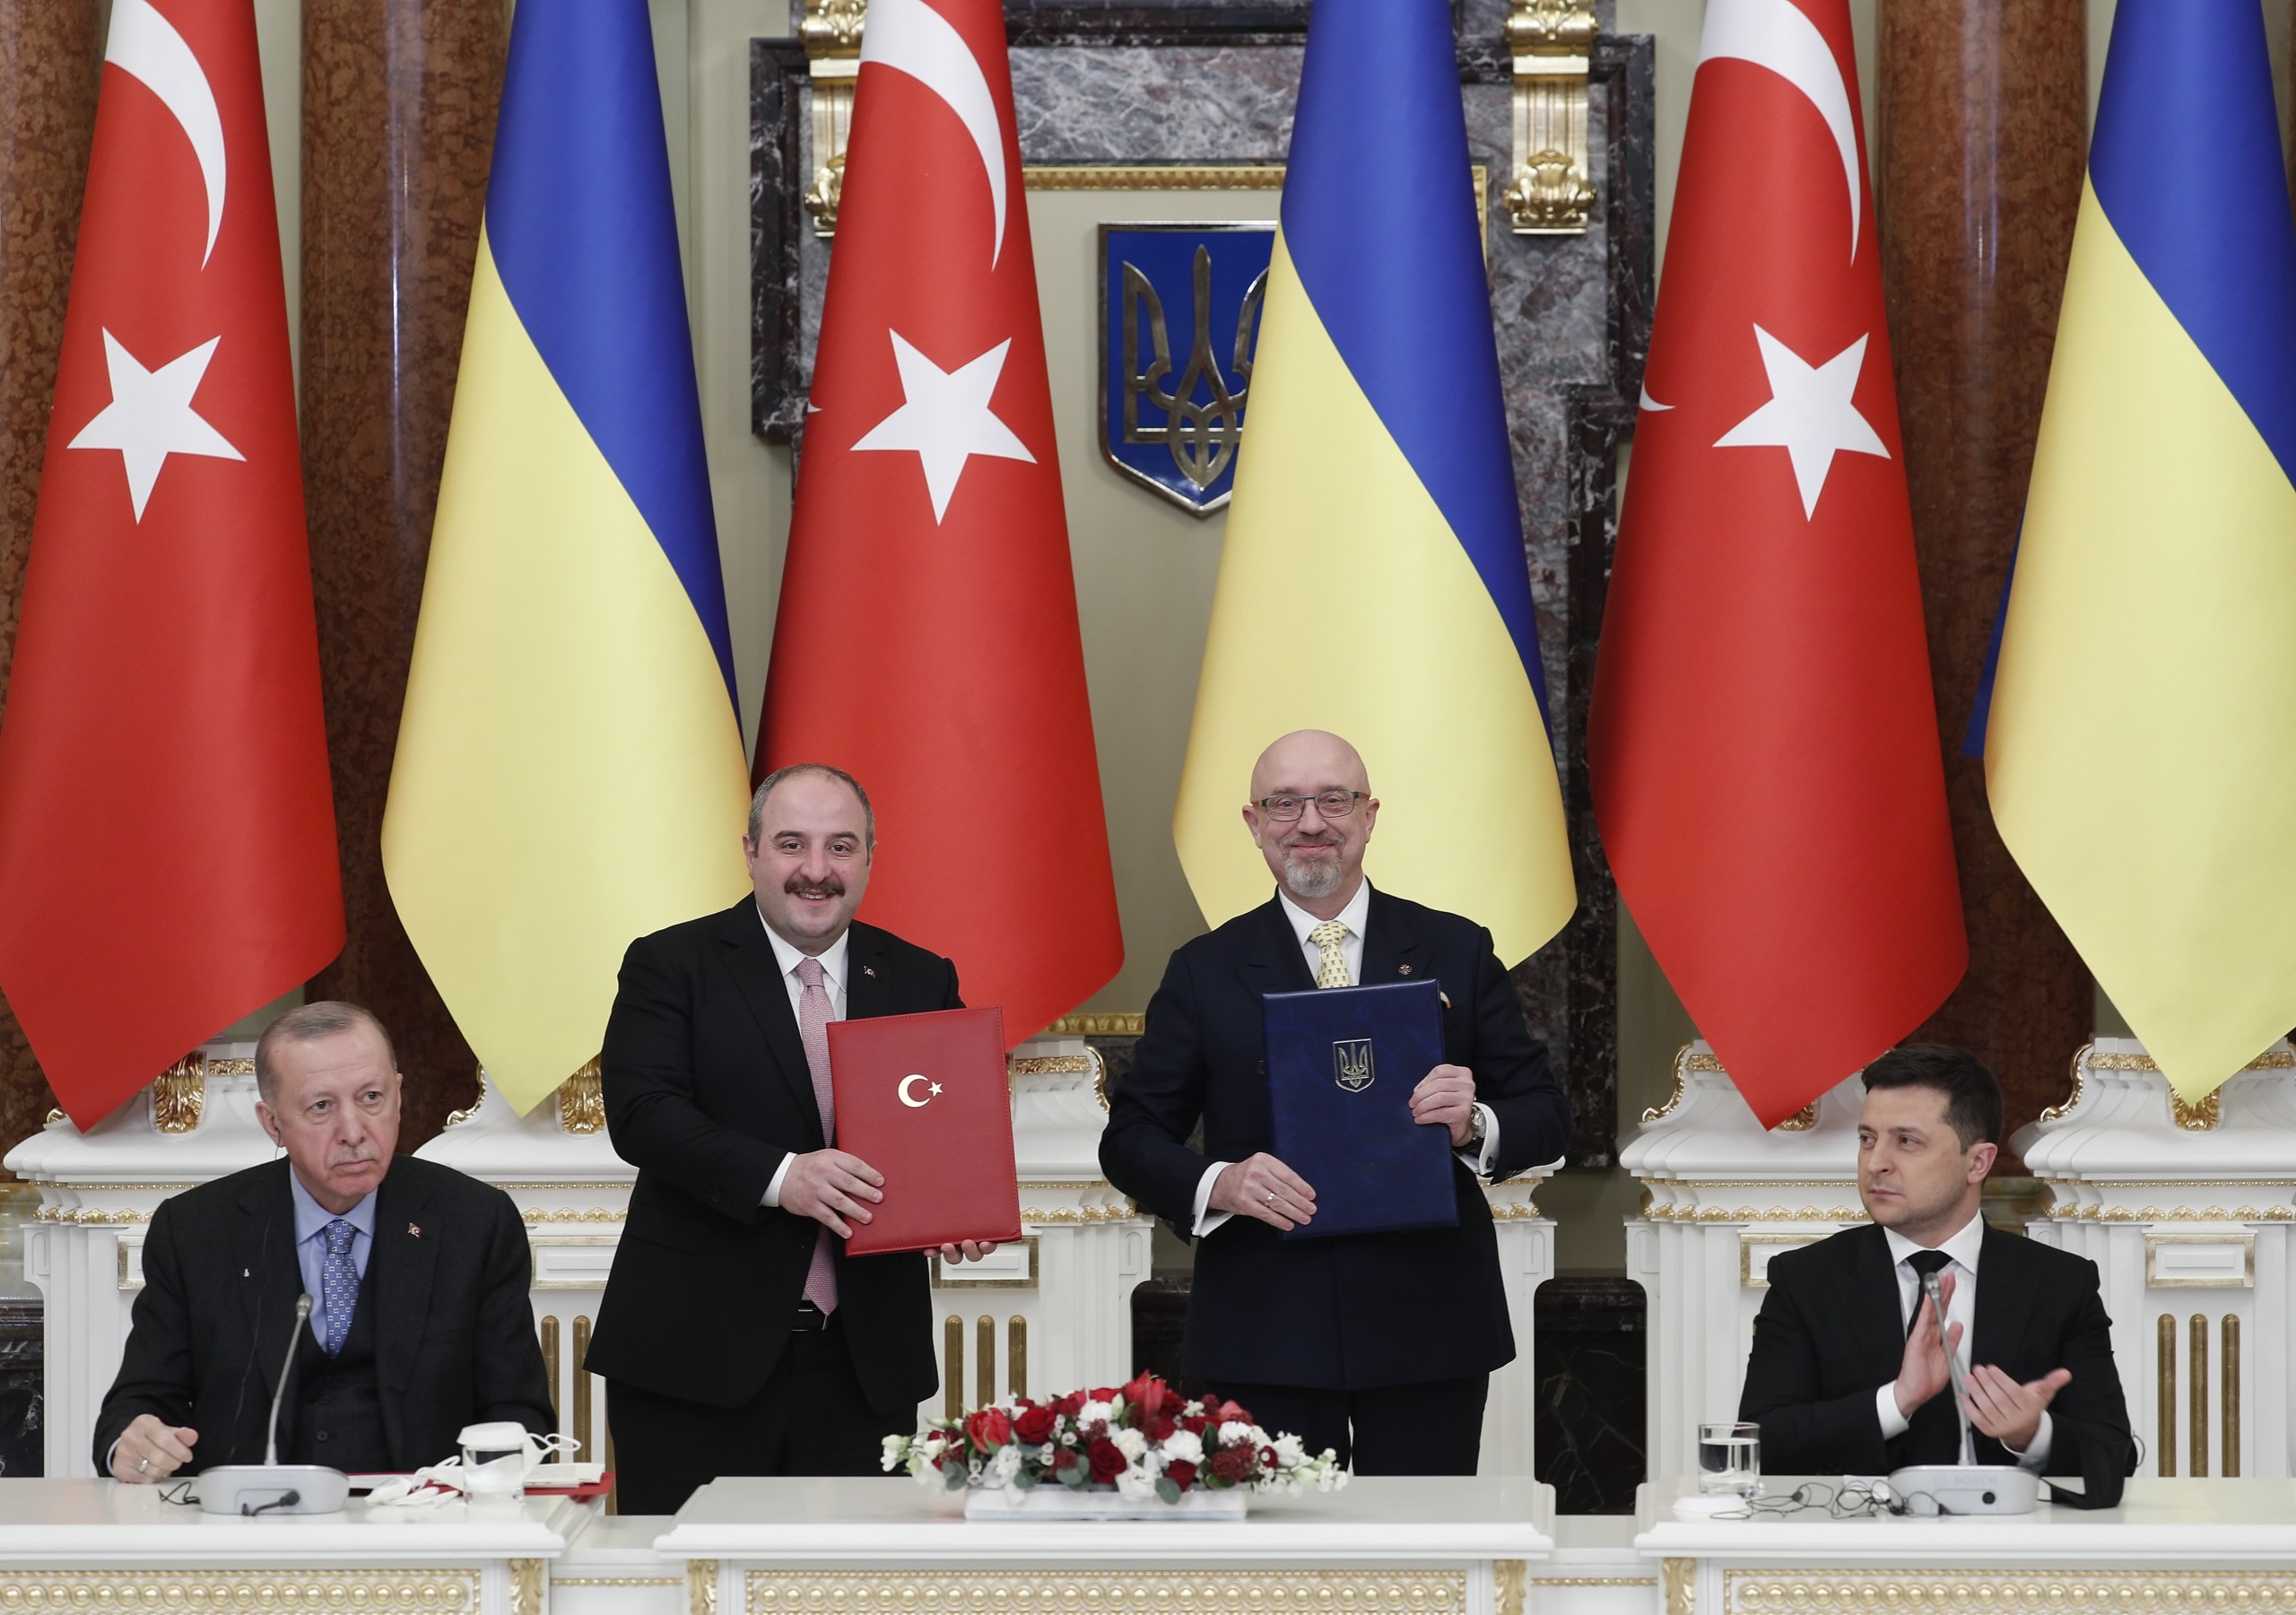 epa09725404 Ukrainian President Volodymyr Zelensky (R) and his Turkish counterpart Recep Tayyip Erdogan (L) attend a document signing ceremony before their joint briefing following their talks at the Mariinsky Palace in Kiev, Ukraine, 03 February 2022. The Turkish President arrived in Ukraine to meet with top Ukrainian officials amid escalation on the Ukraine-Russian border.  EPA/SERGEY DOLZHENKO